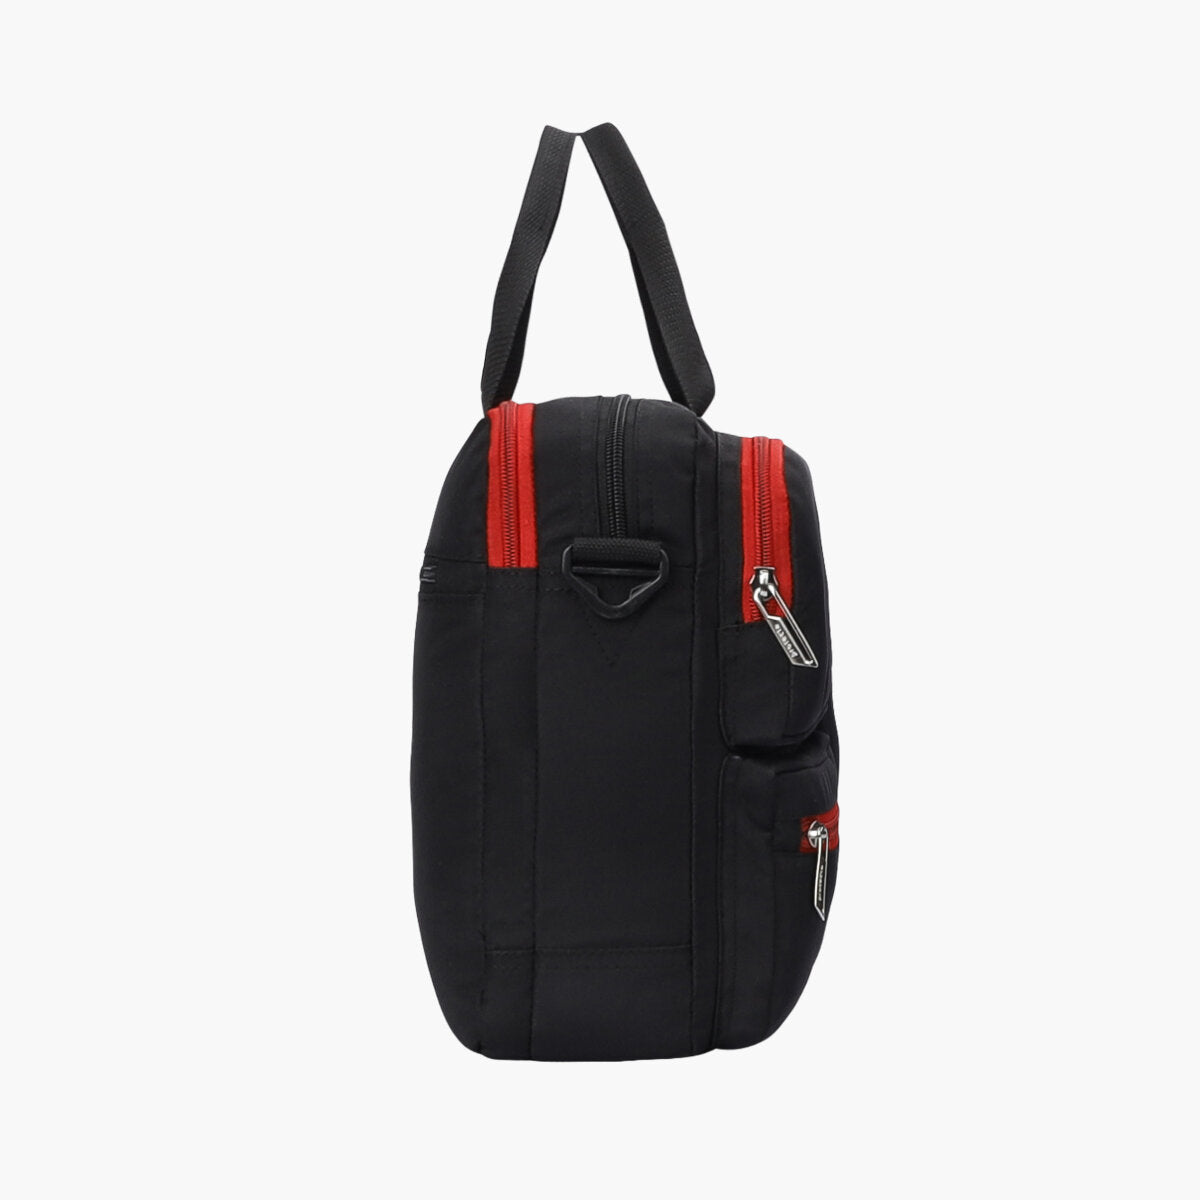 Black Red | Protecta Organised Chaos 2.0 Office Laptop Bag - 4